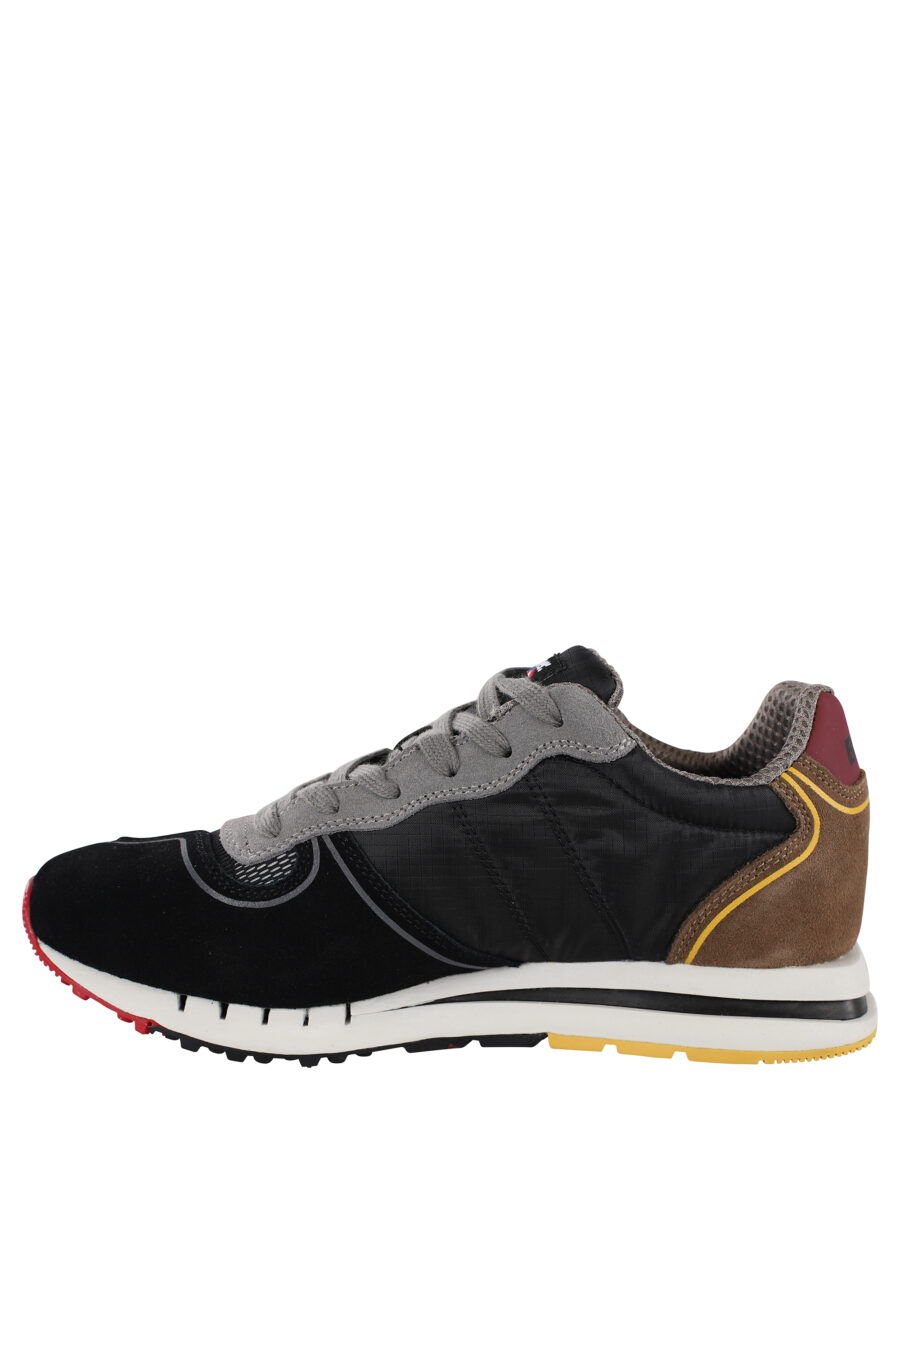 Trainers "quartz" black multicoloured with breathable mesh - IMG 6821